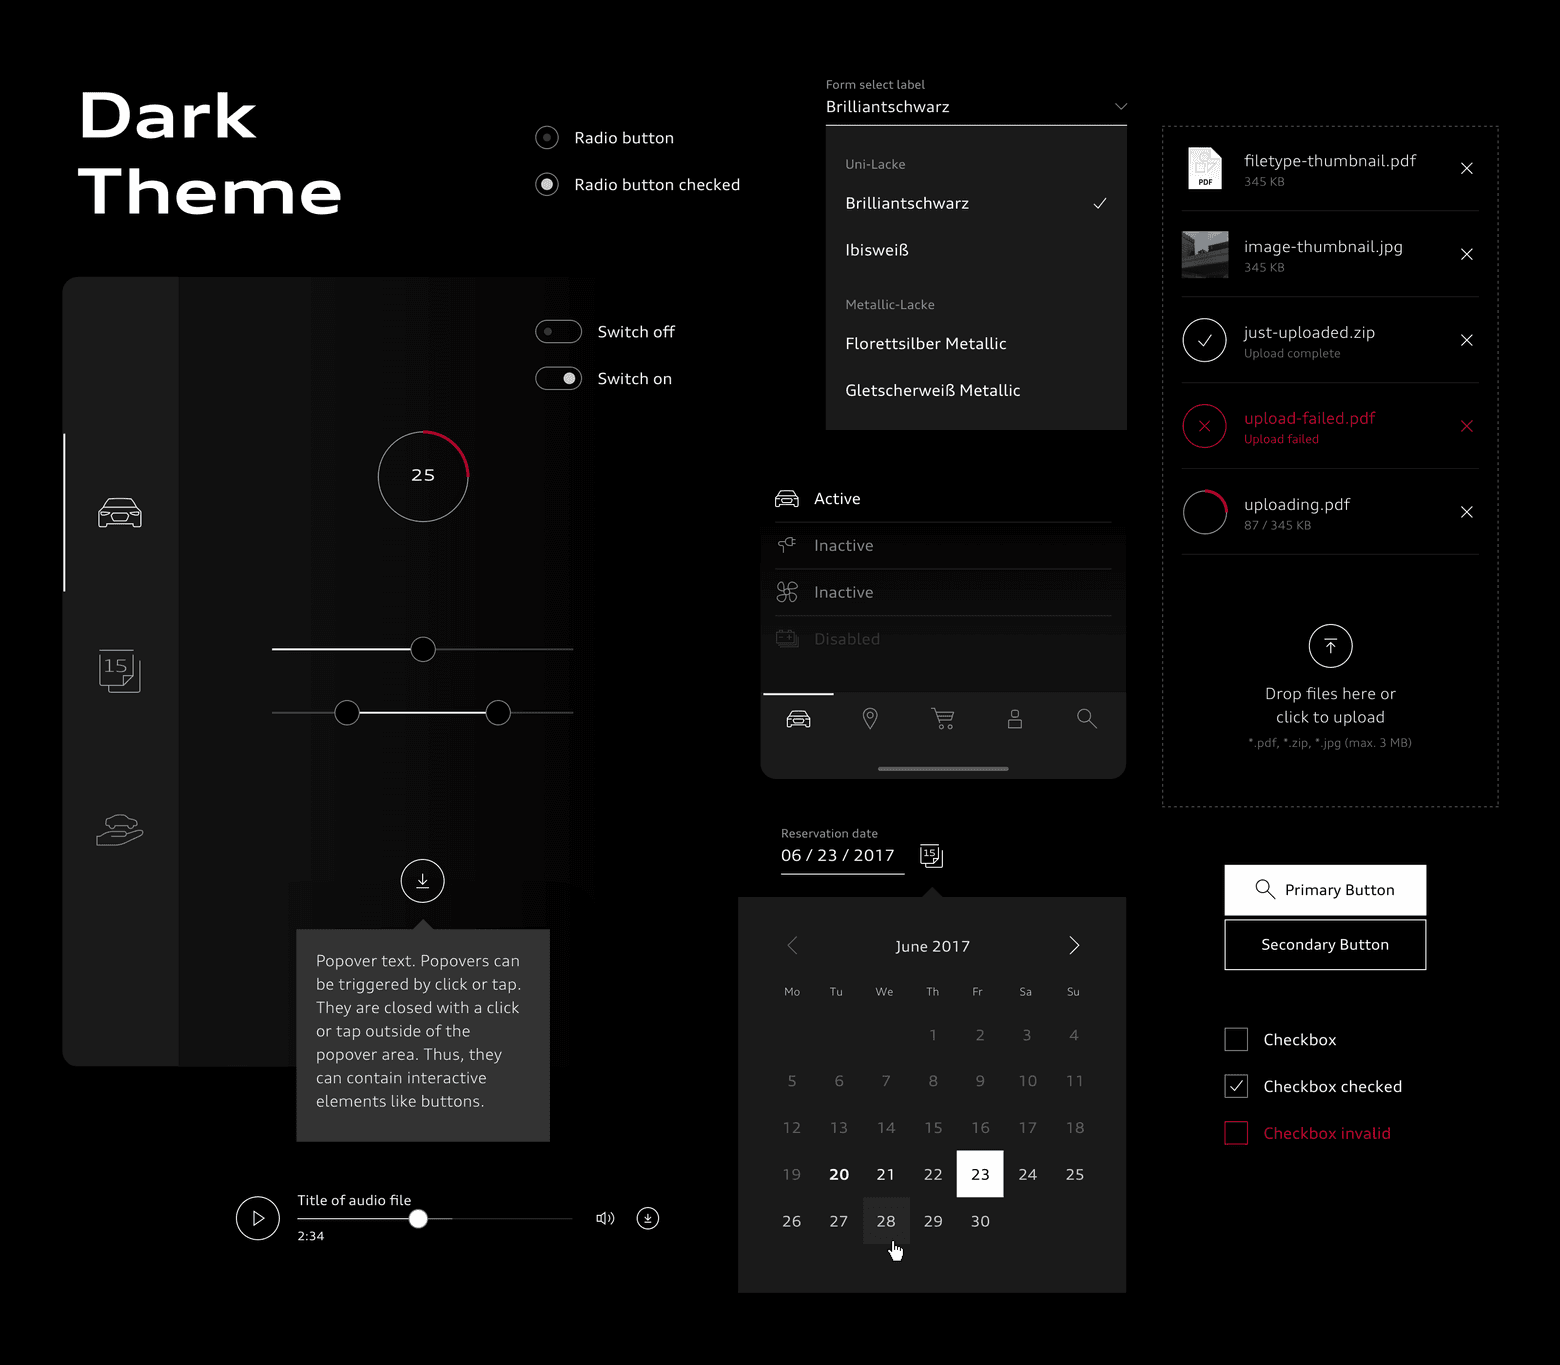 Audi interface components in dark theme.